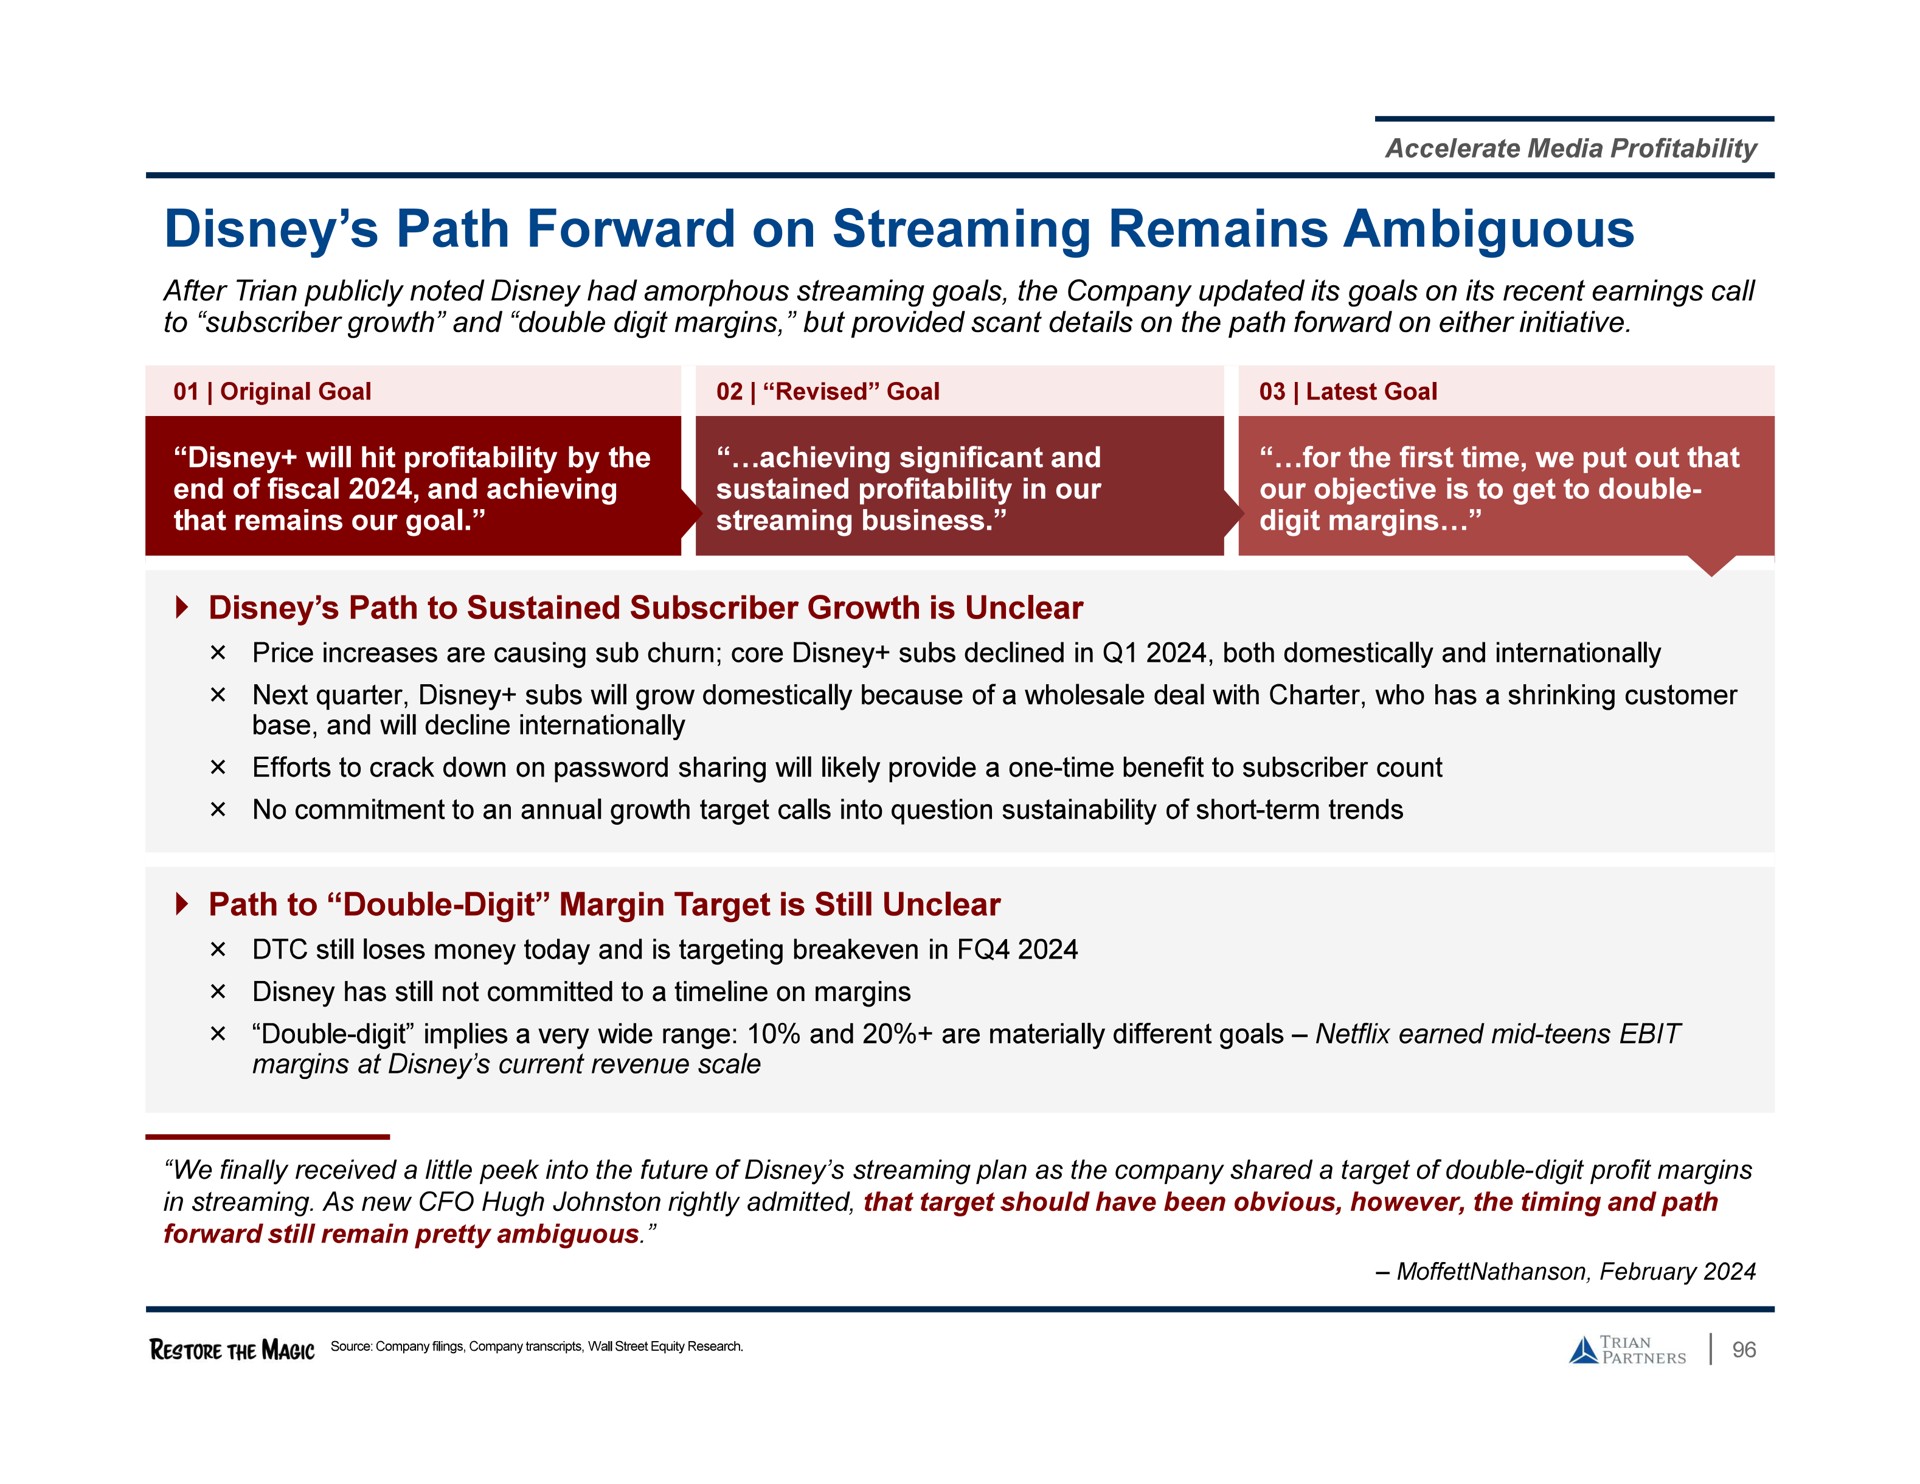 path forward on streaming remains ambiguous | Trian Partners